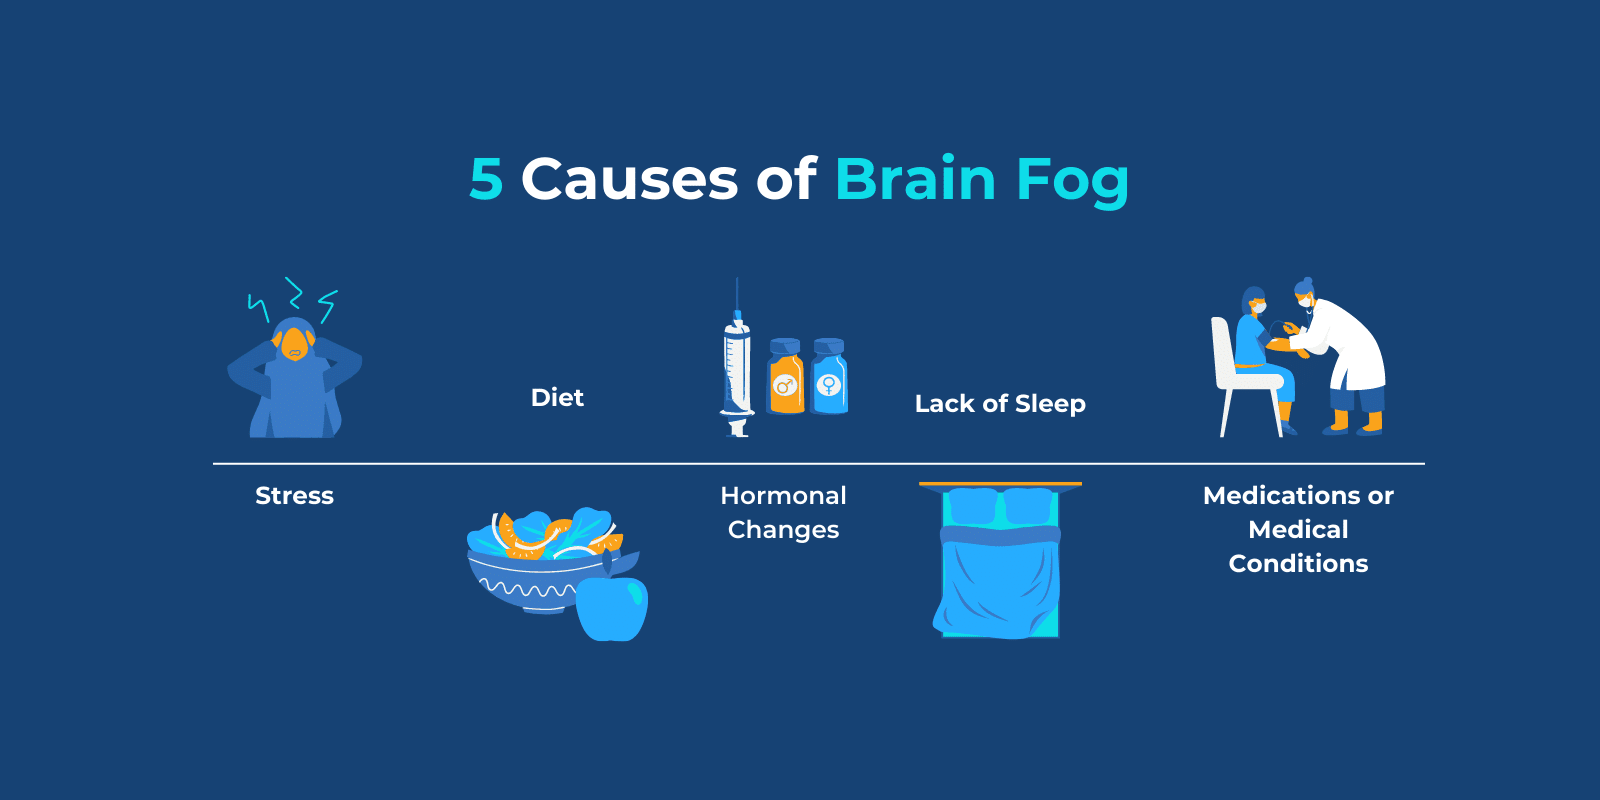 5 causes of brain fog are listed with relevenat illustrations: Stress, Diet, Hormonal changes, lack of sleep, and medications or medical conditions.